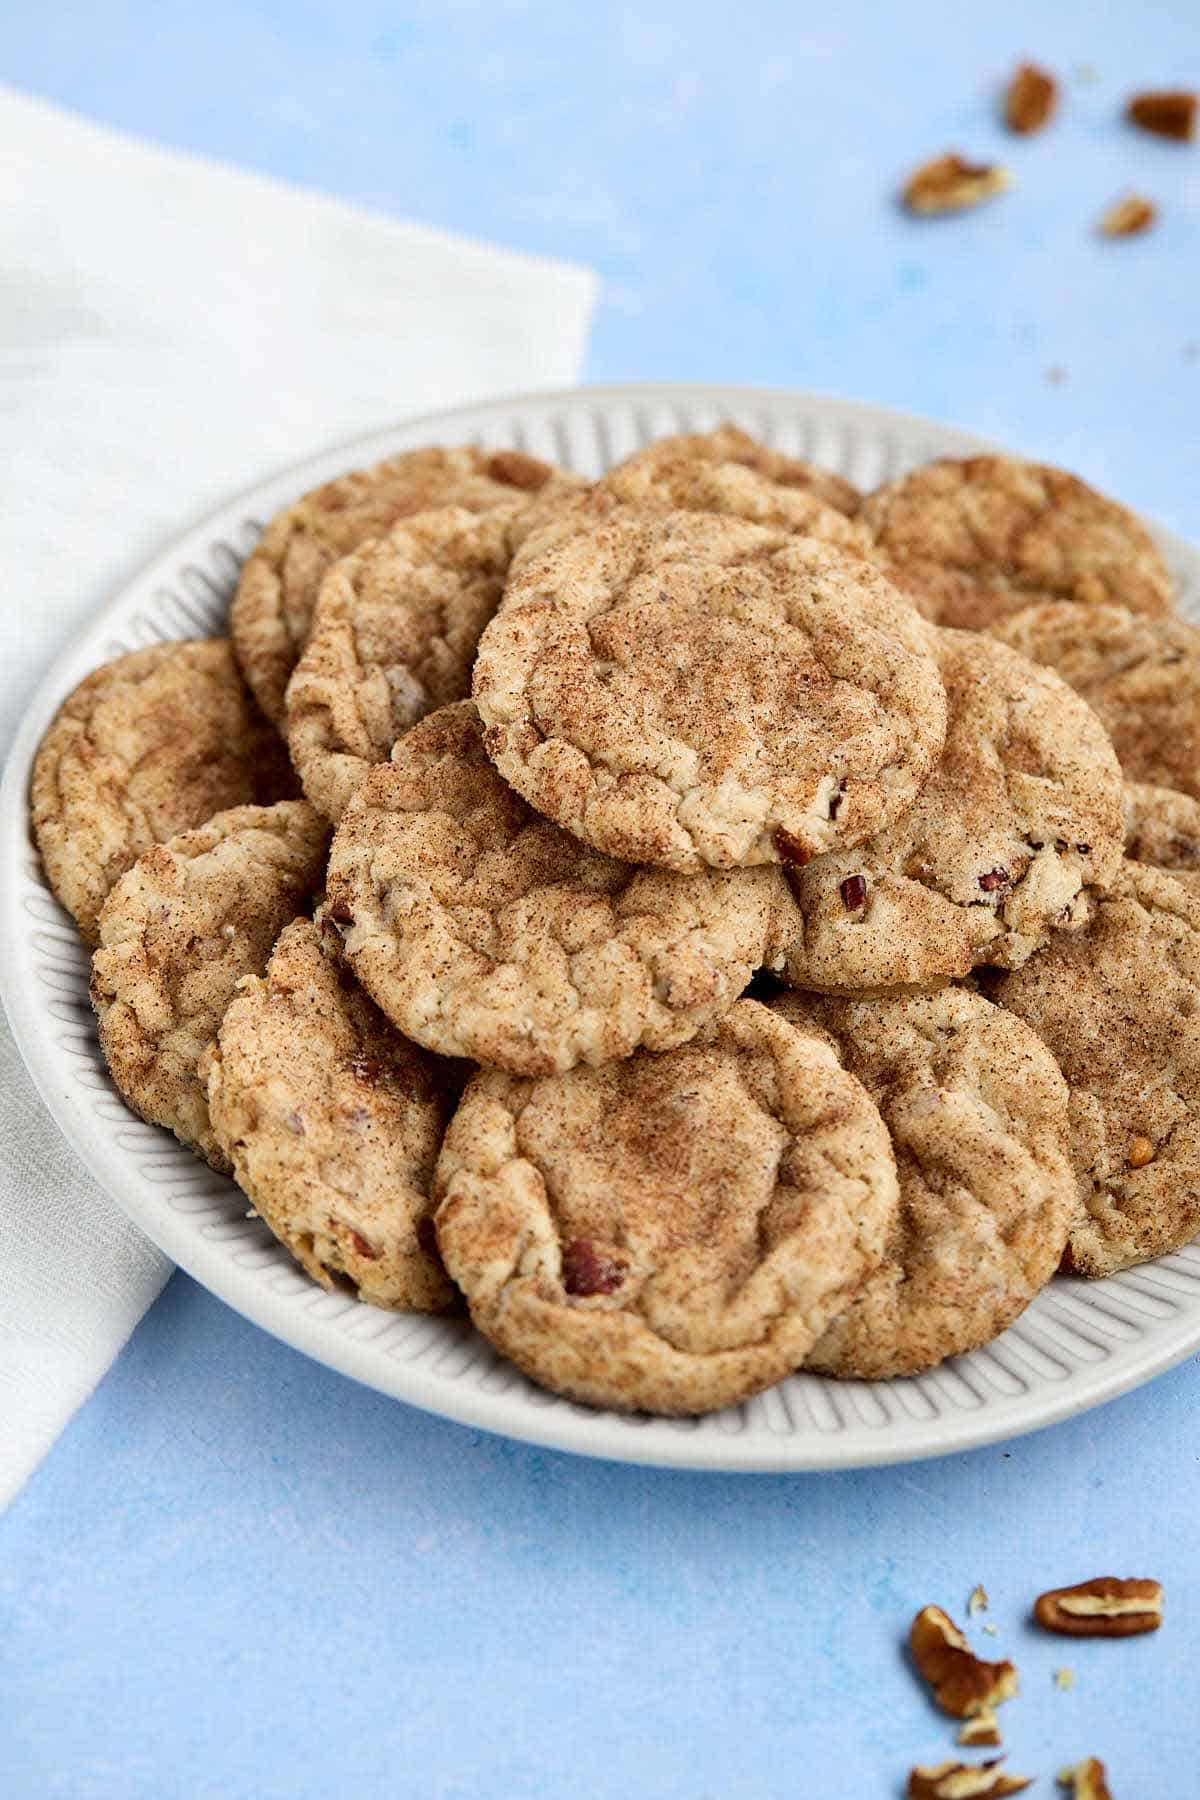 Plate of butter pecan cake mix cookies with pecans scattered around.